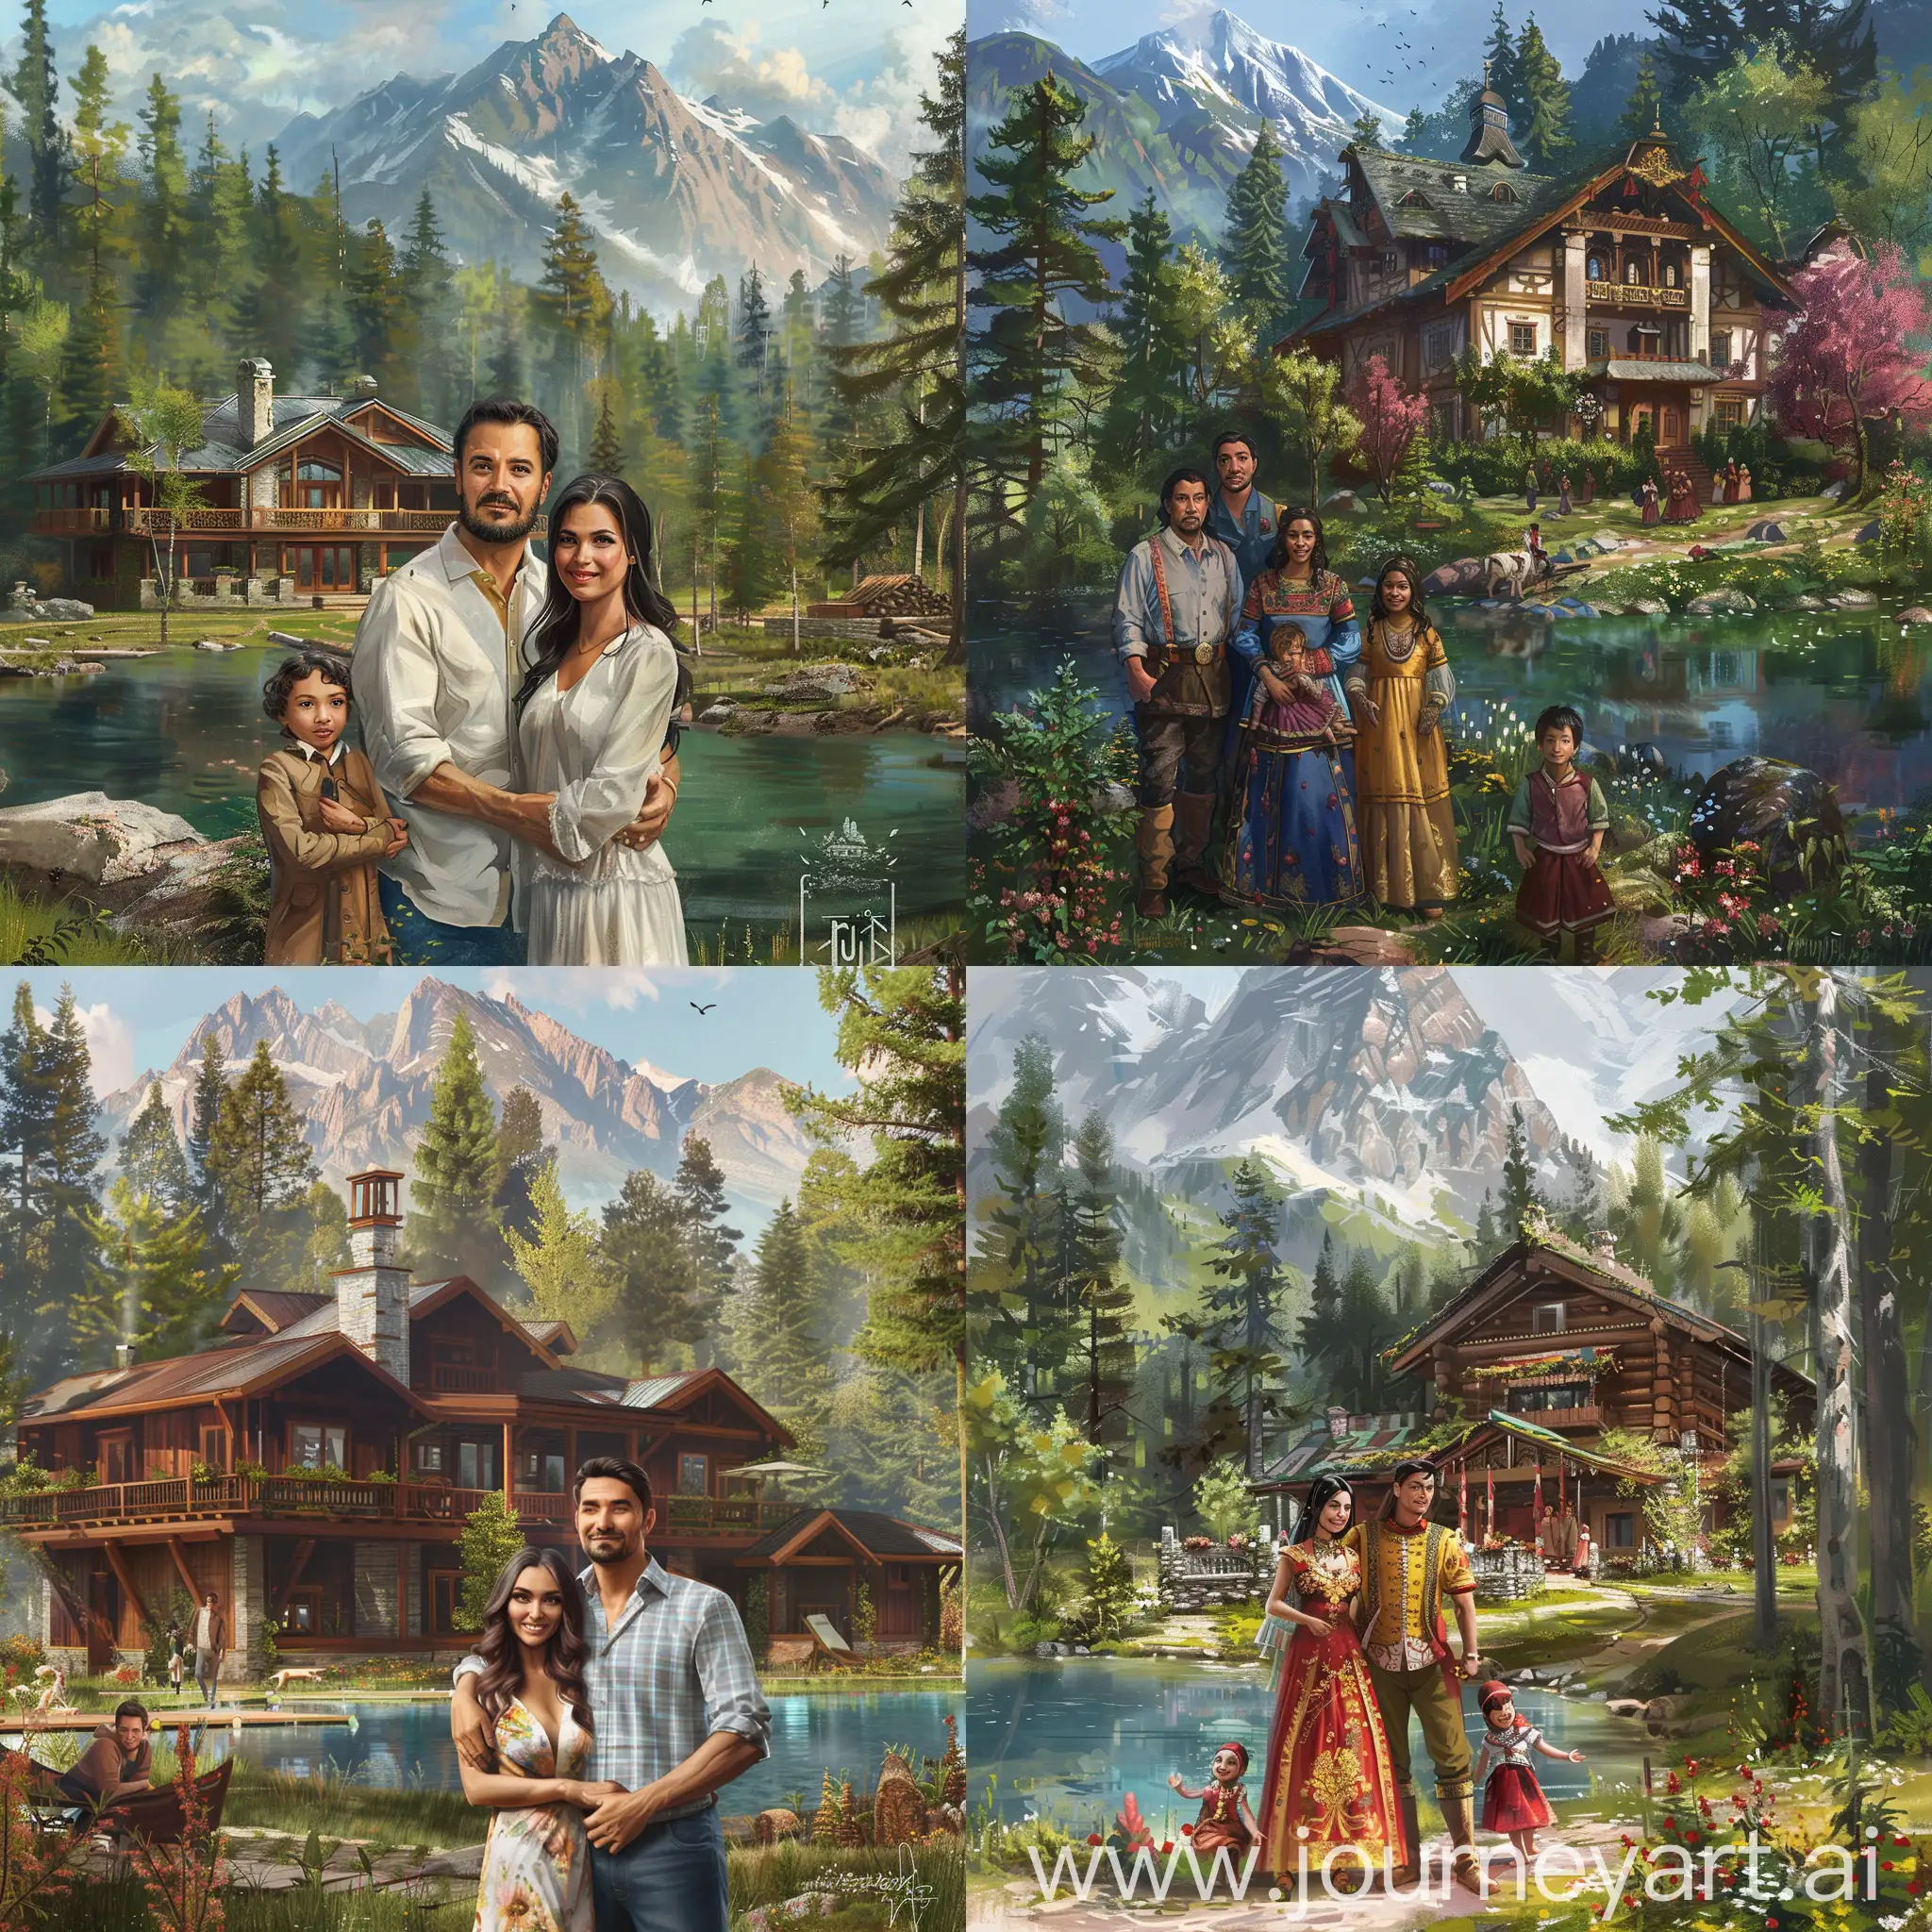 make me a picture of a kazakh woman and portuguese man couple and their family in a beautiful house near the forest and lake